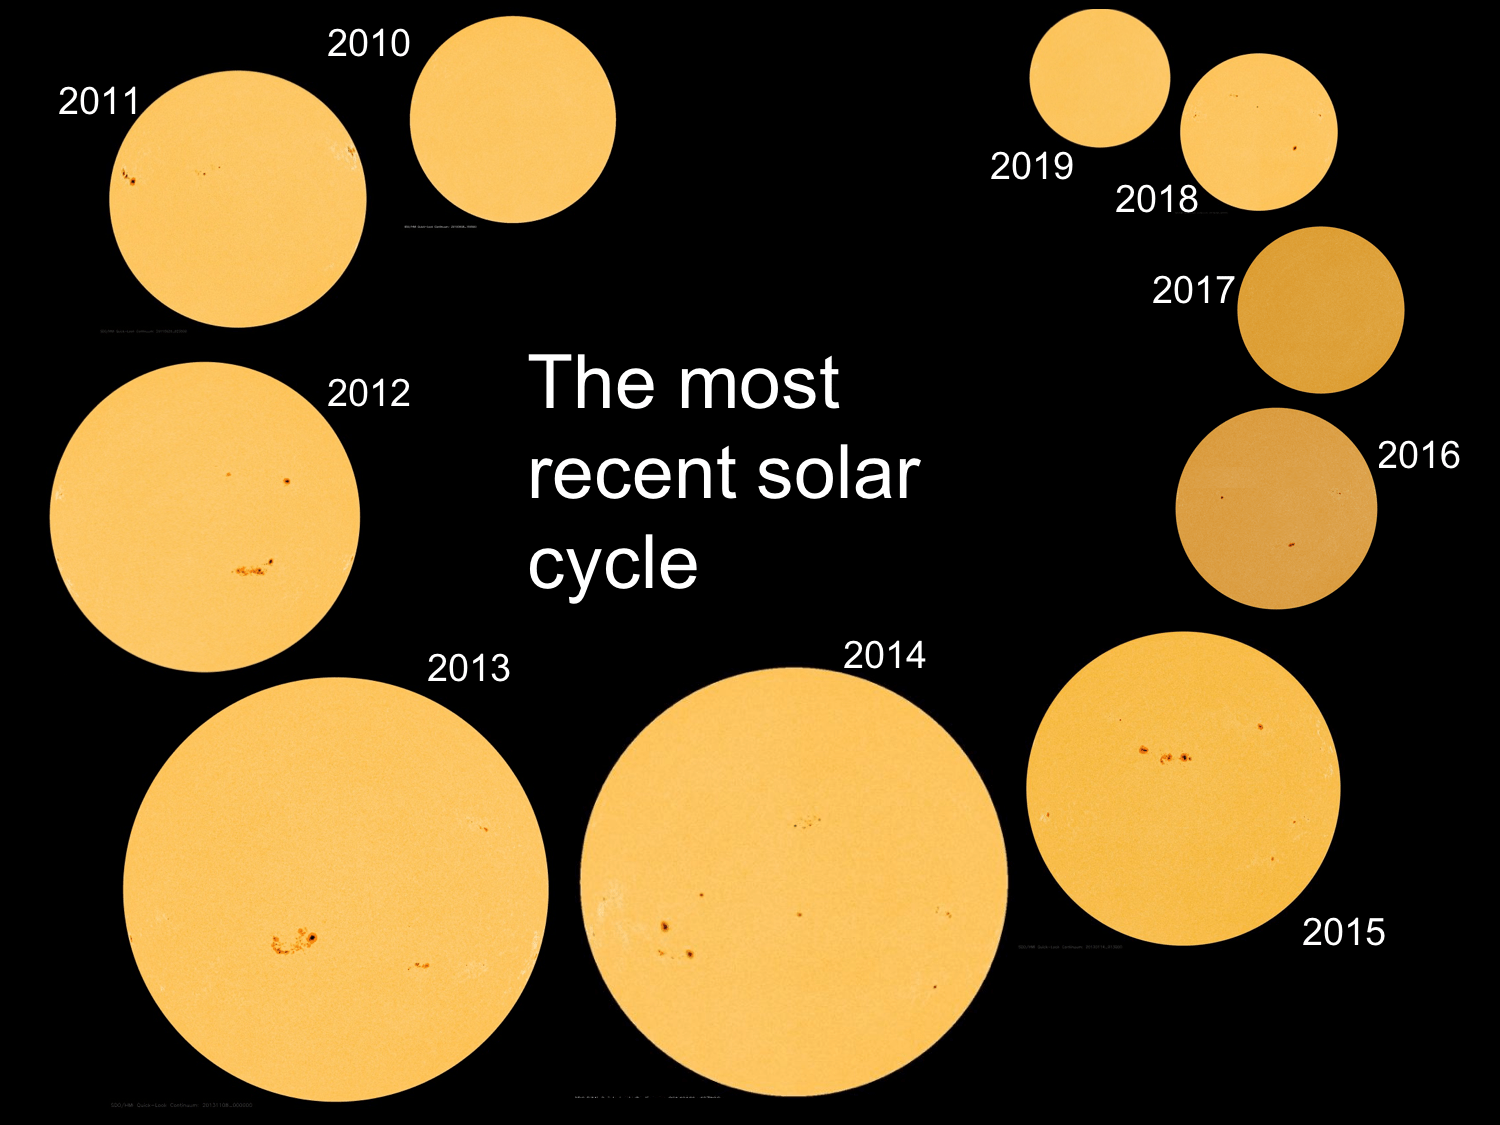 Ten different images of the sun are shown, each representative of a different year during the most recent solar cycle. The less active years have a sun which is much more monochrome and with few spots compared to the solar maxima years, which have clear sunspot groups on the surface.